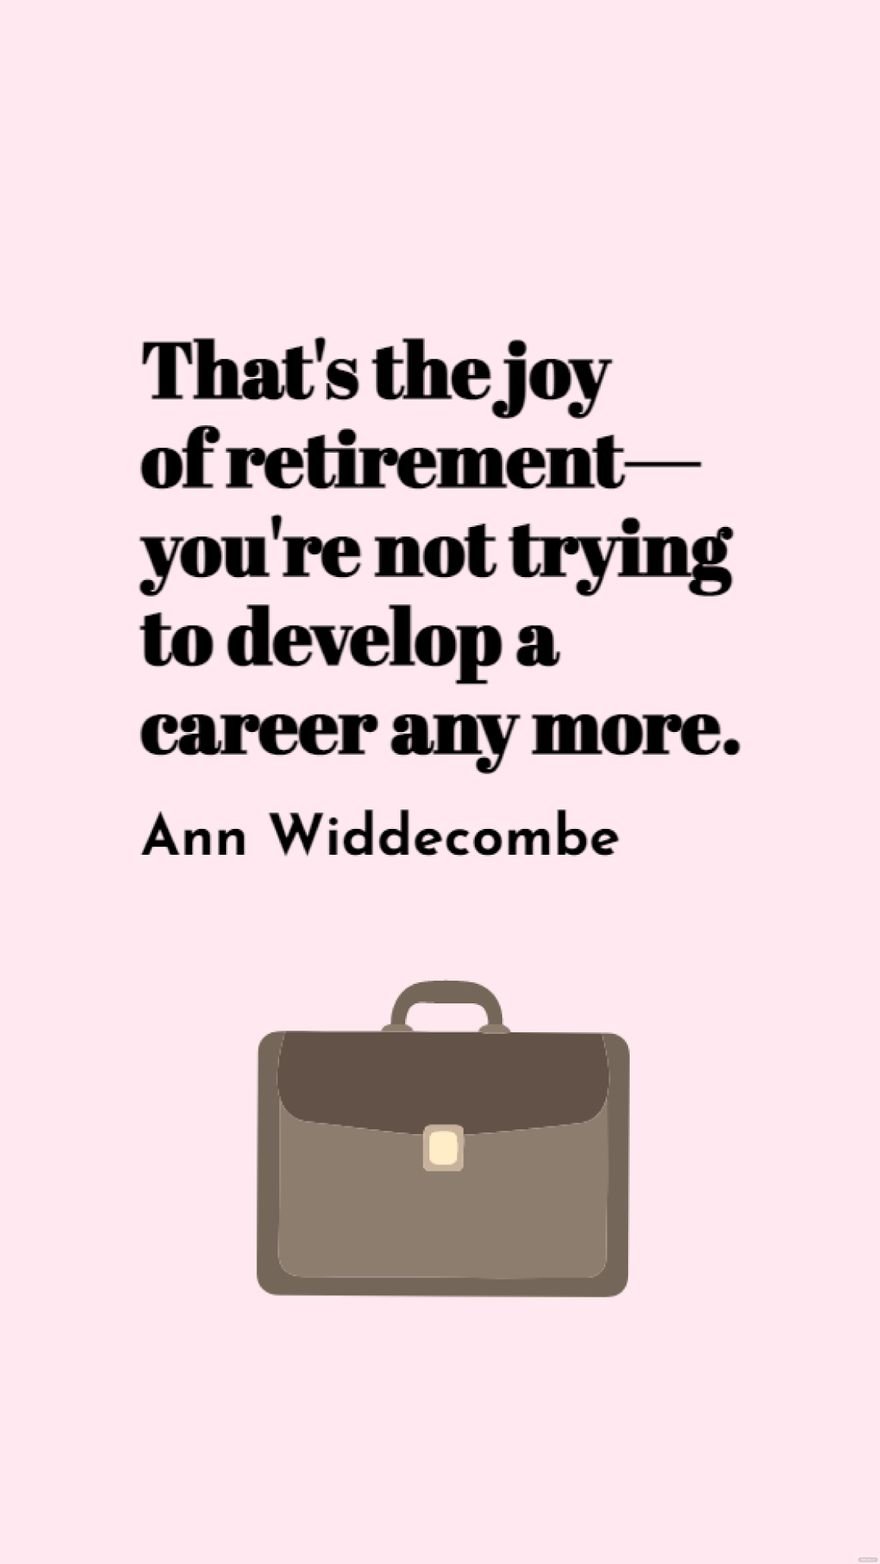 Free Ann Widdecombe - That's the joy of retirement - you're not trying to develop a career any more.